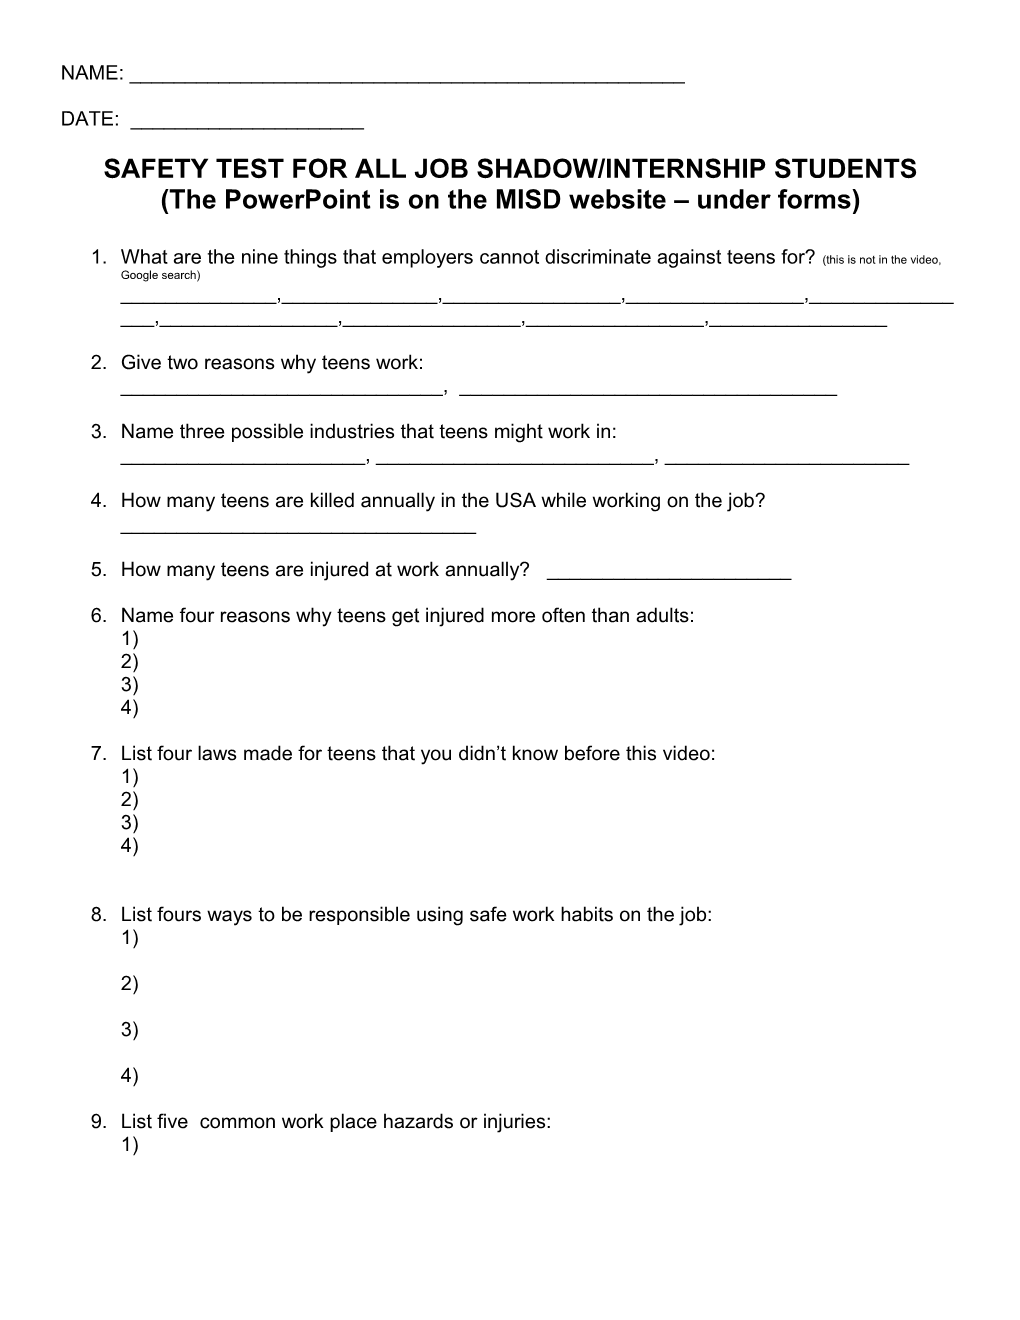 Safety Test for All School-To-Work Students